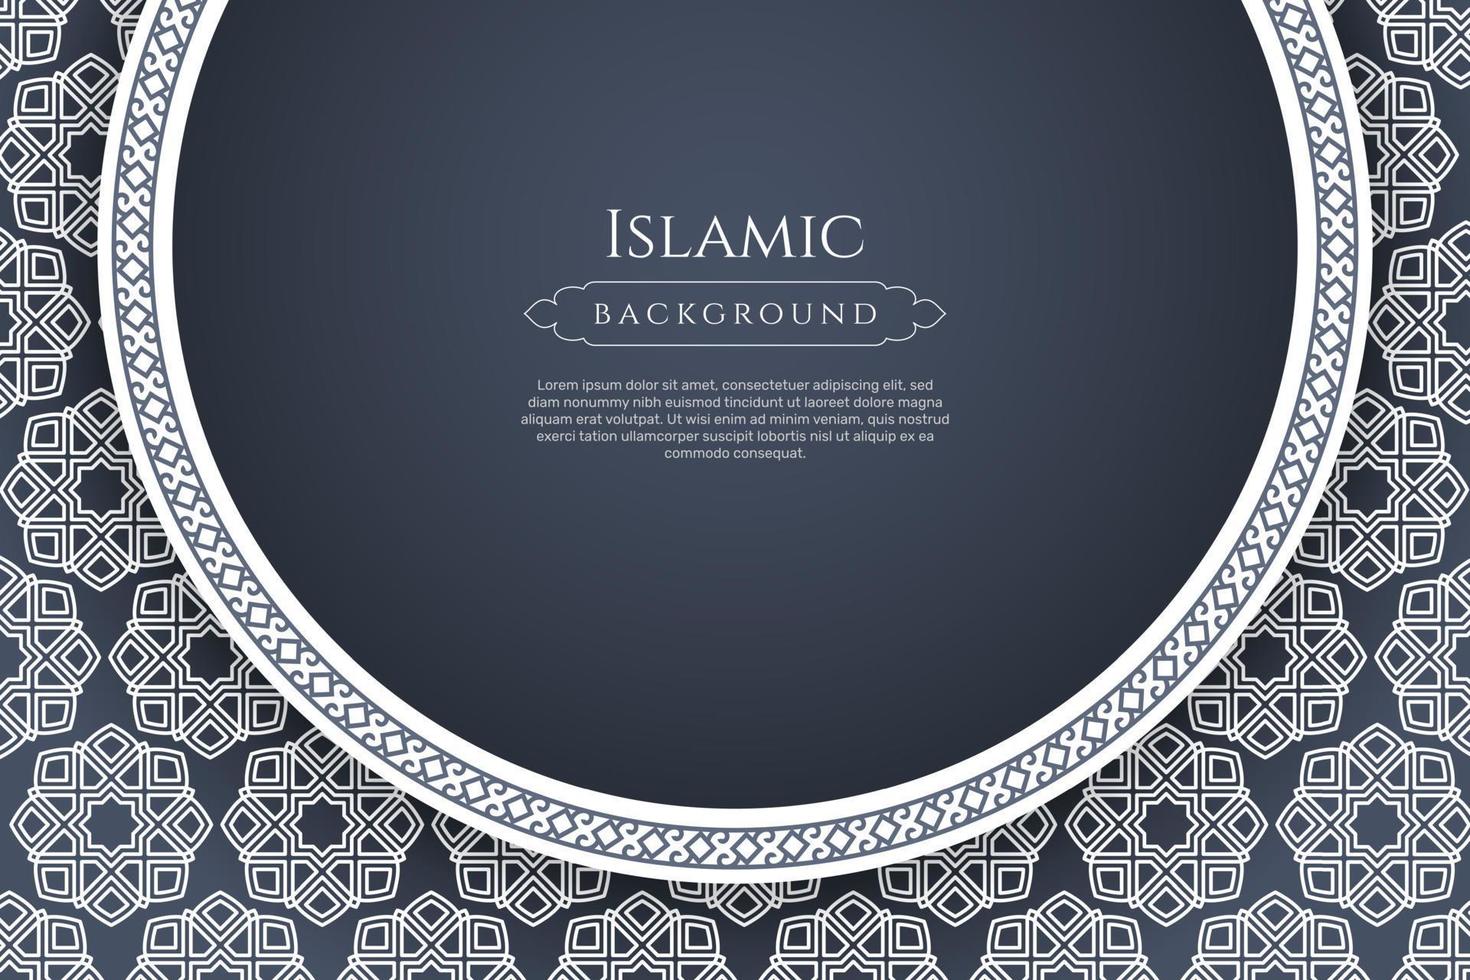 Islamic ornament border frame pattern background with copy space for text. - Vector. vector